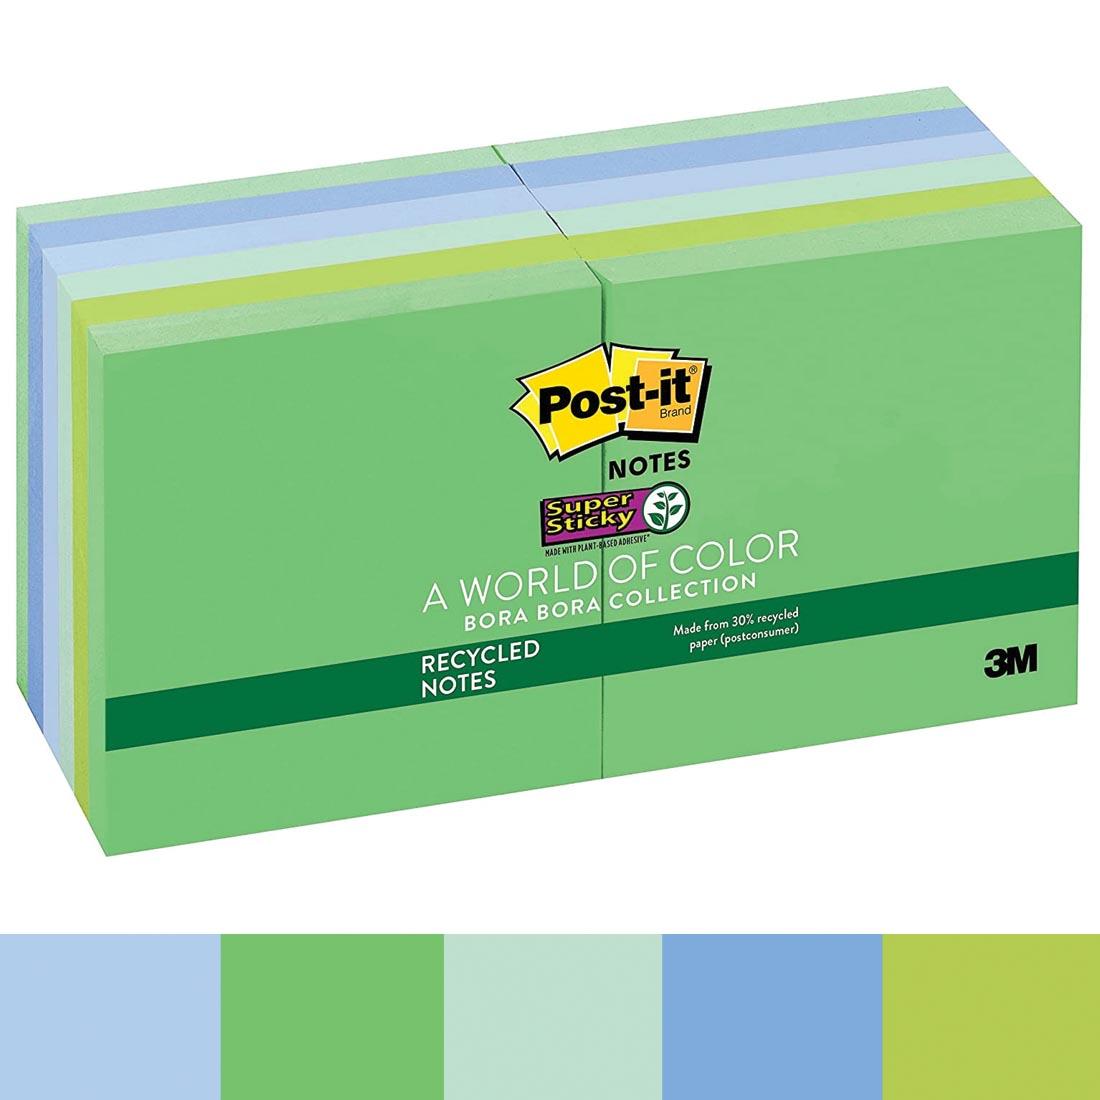 Post-it Super Sticky Notes, 12 pads, with swatches, in Bora Bora colors